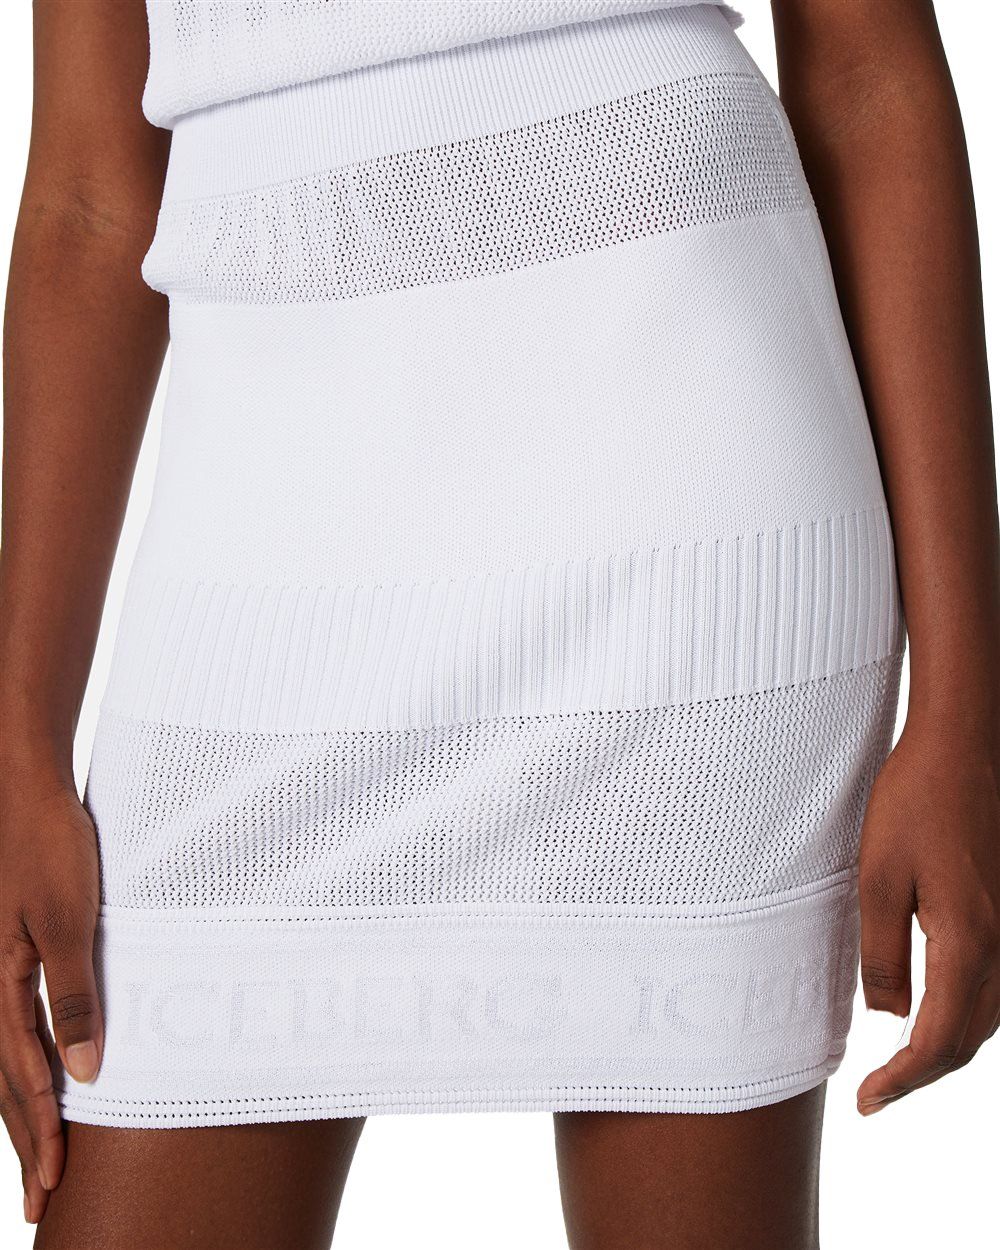 Iceberg Knitted dress with logo Wit